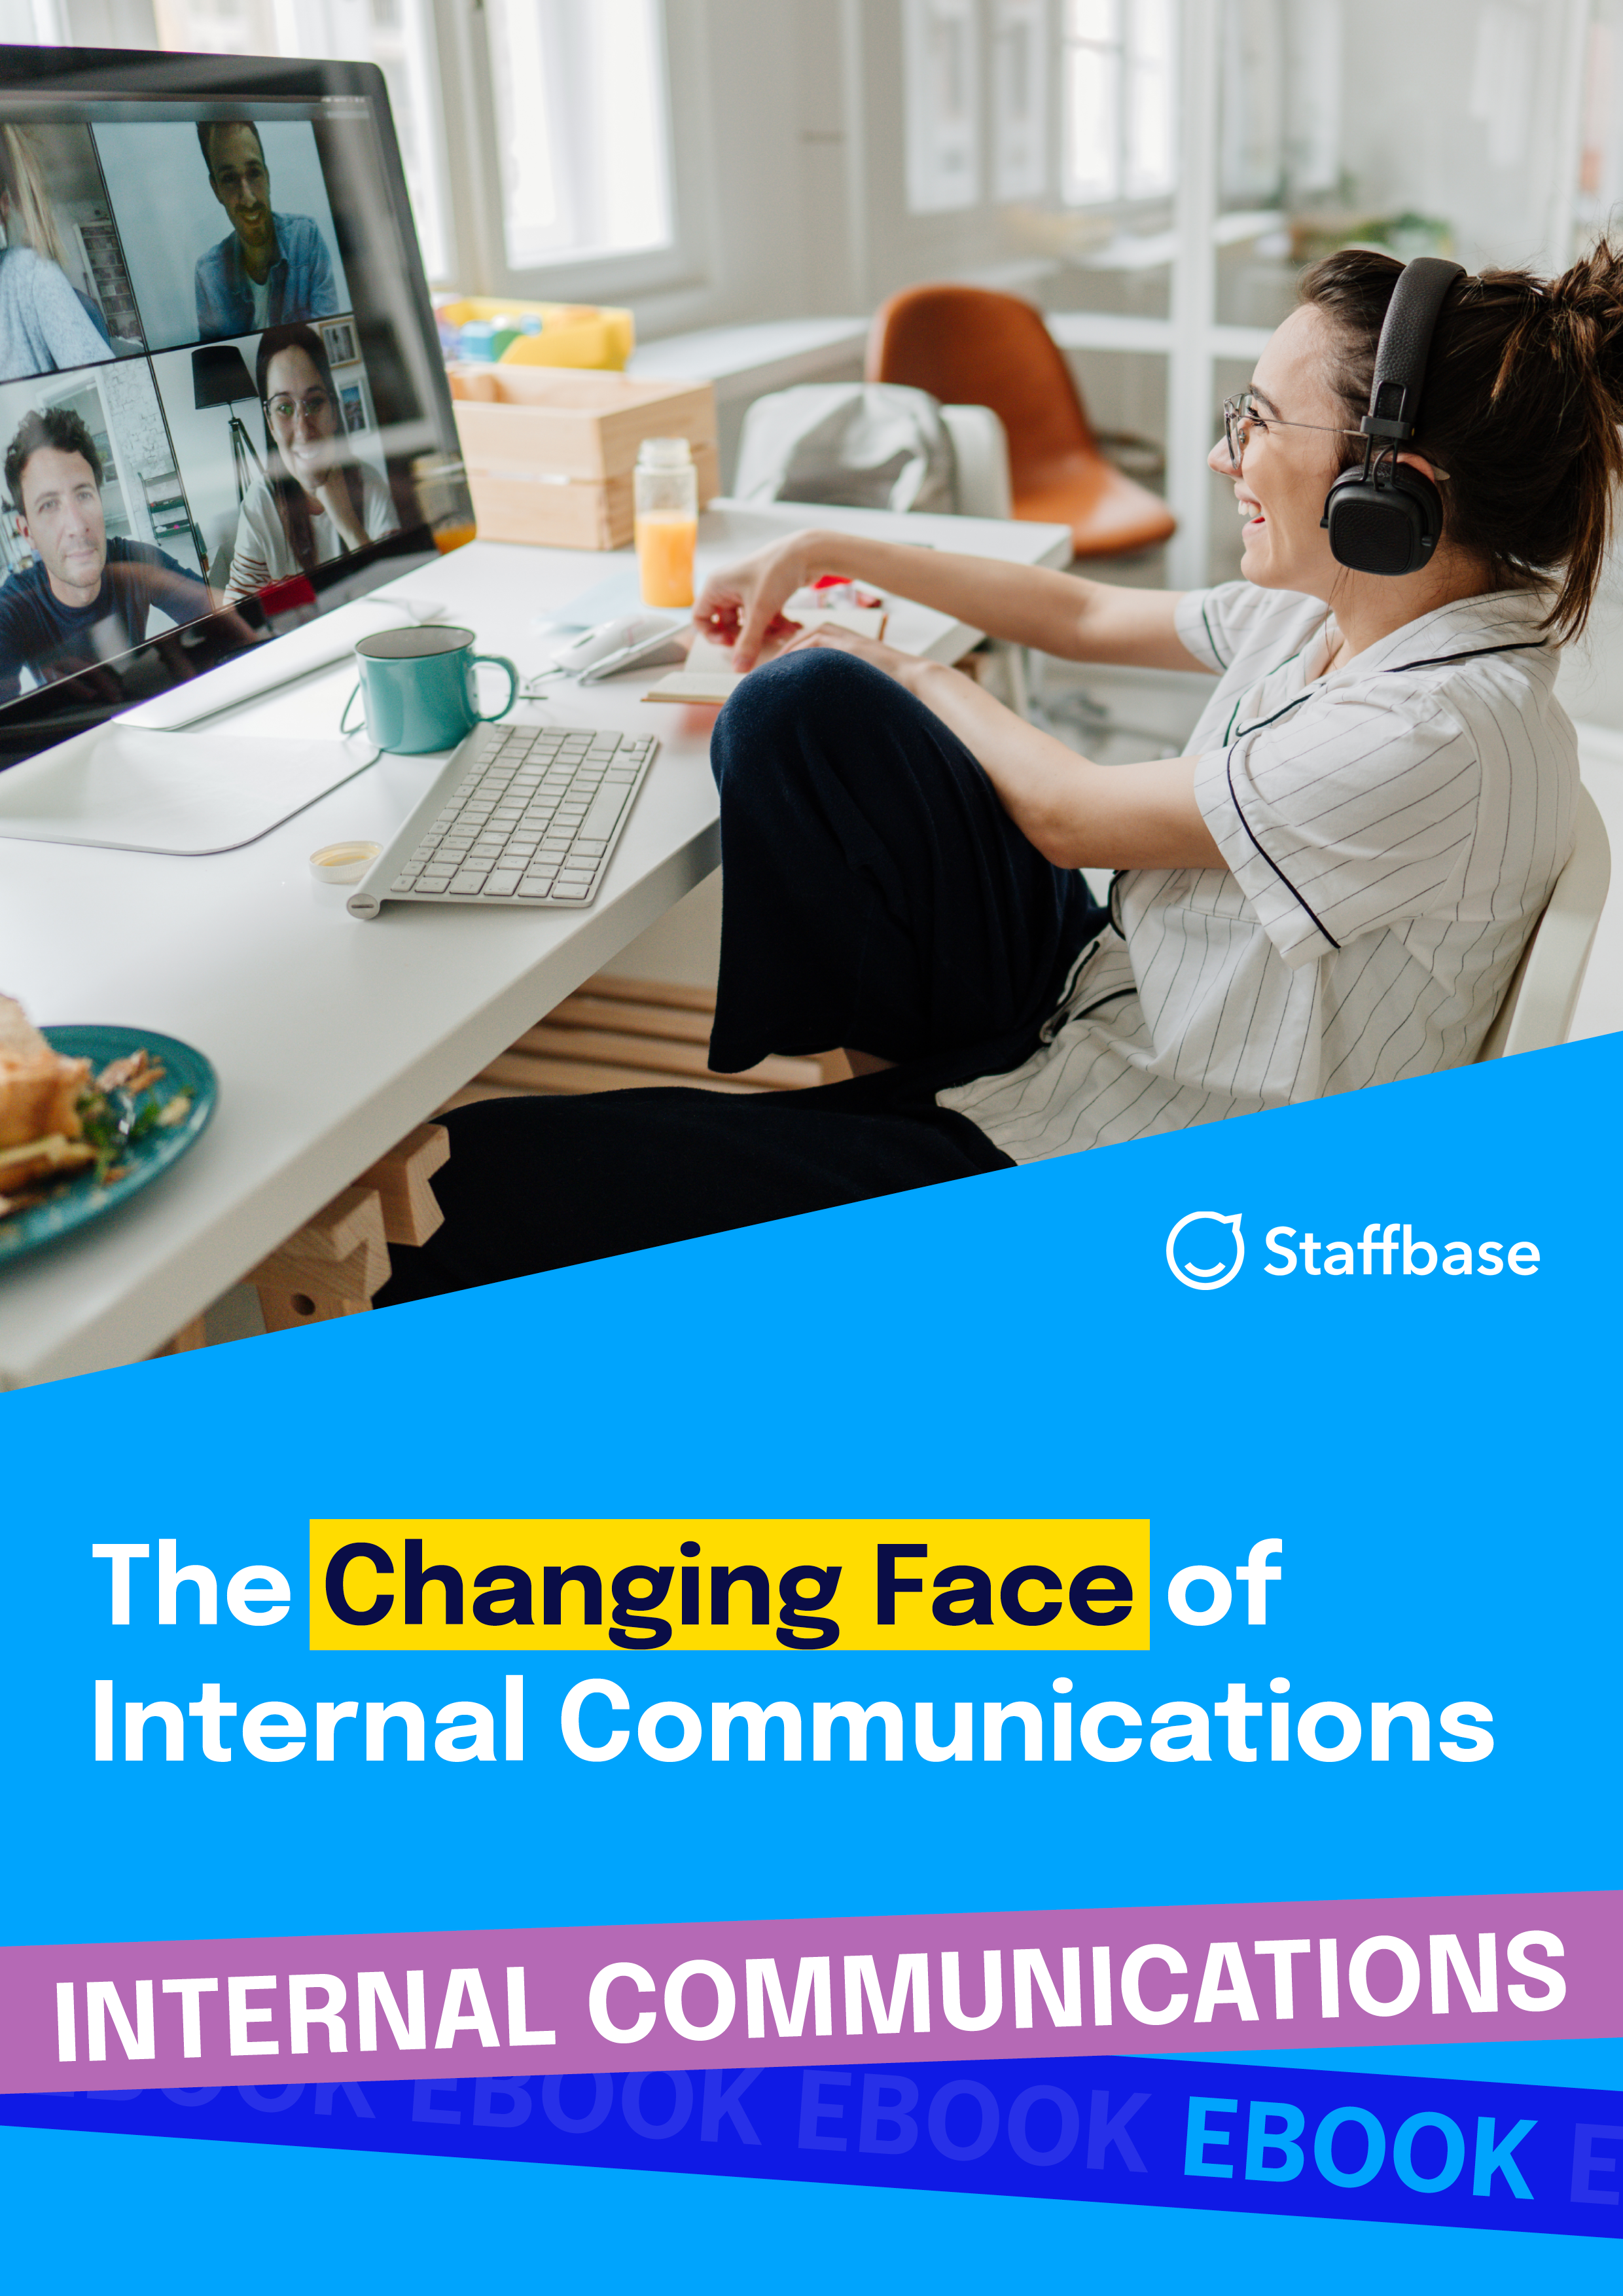 The Changing Face of Internal Communications